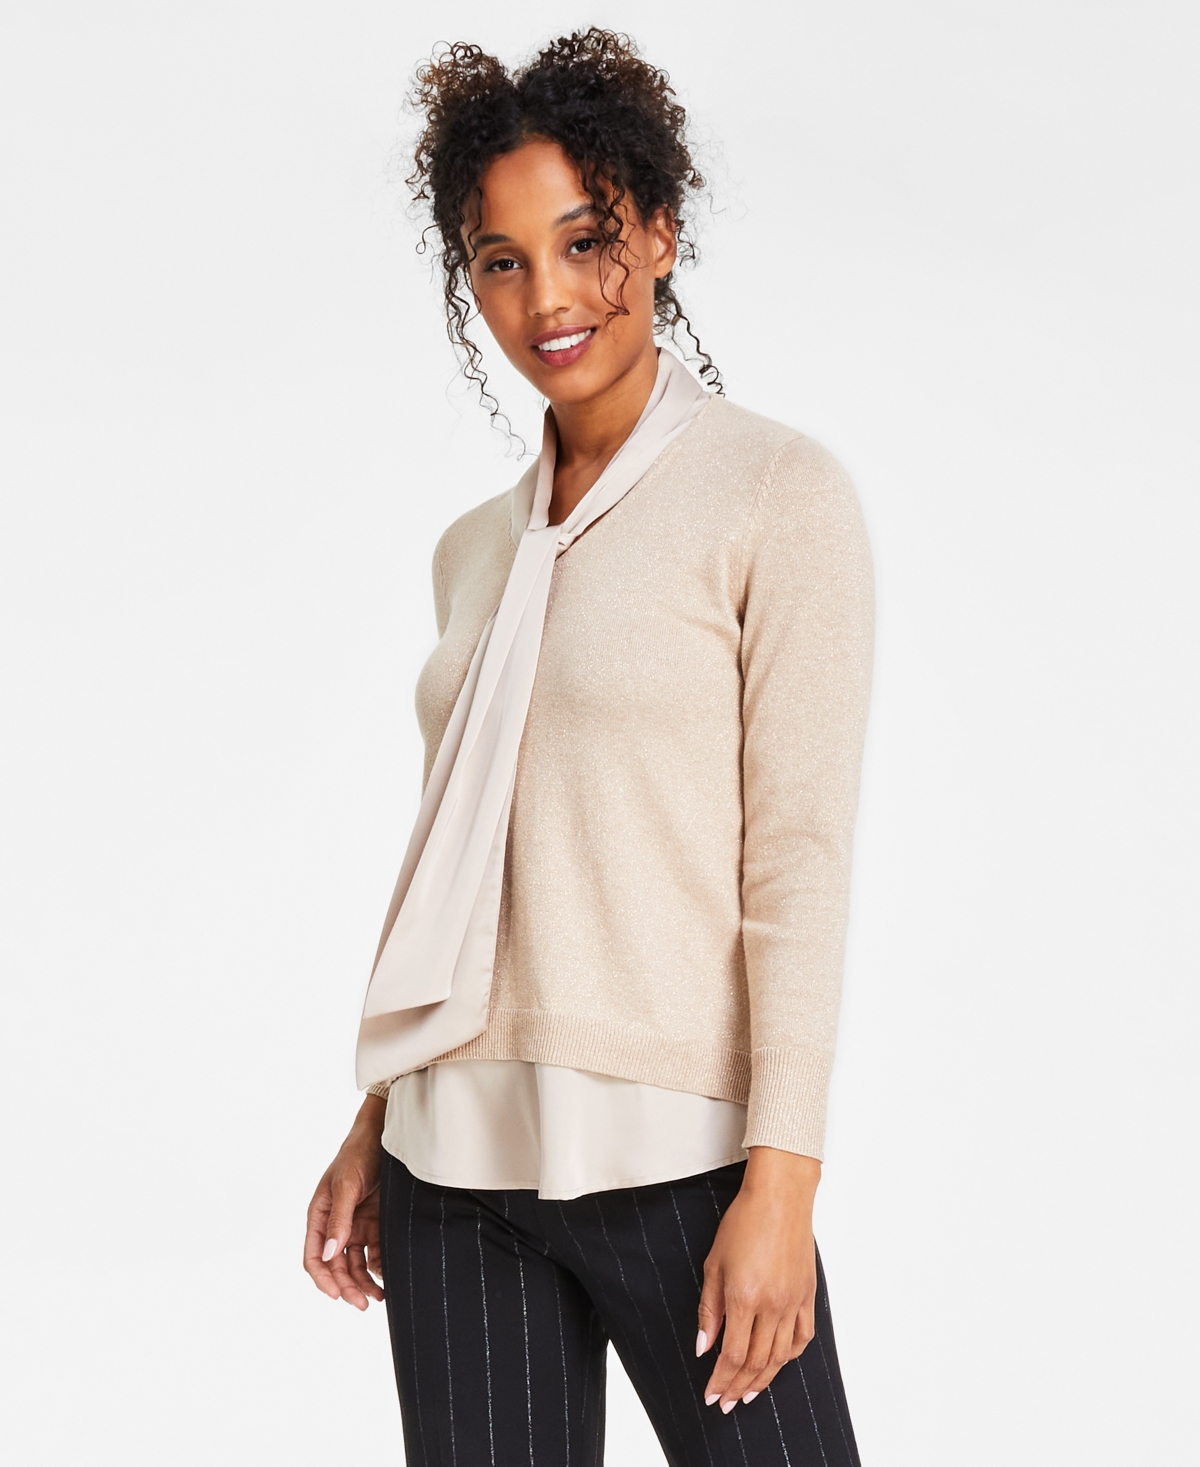 ANNE KLEIN WOMEN'S TIE-NECK LAYERED-LOOK SWEATER, CREATED FOR MACY'S